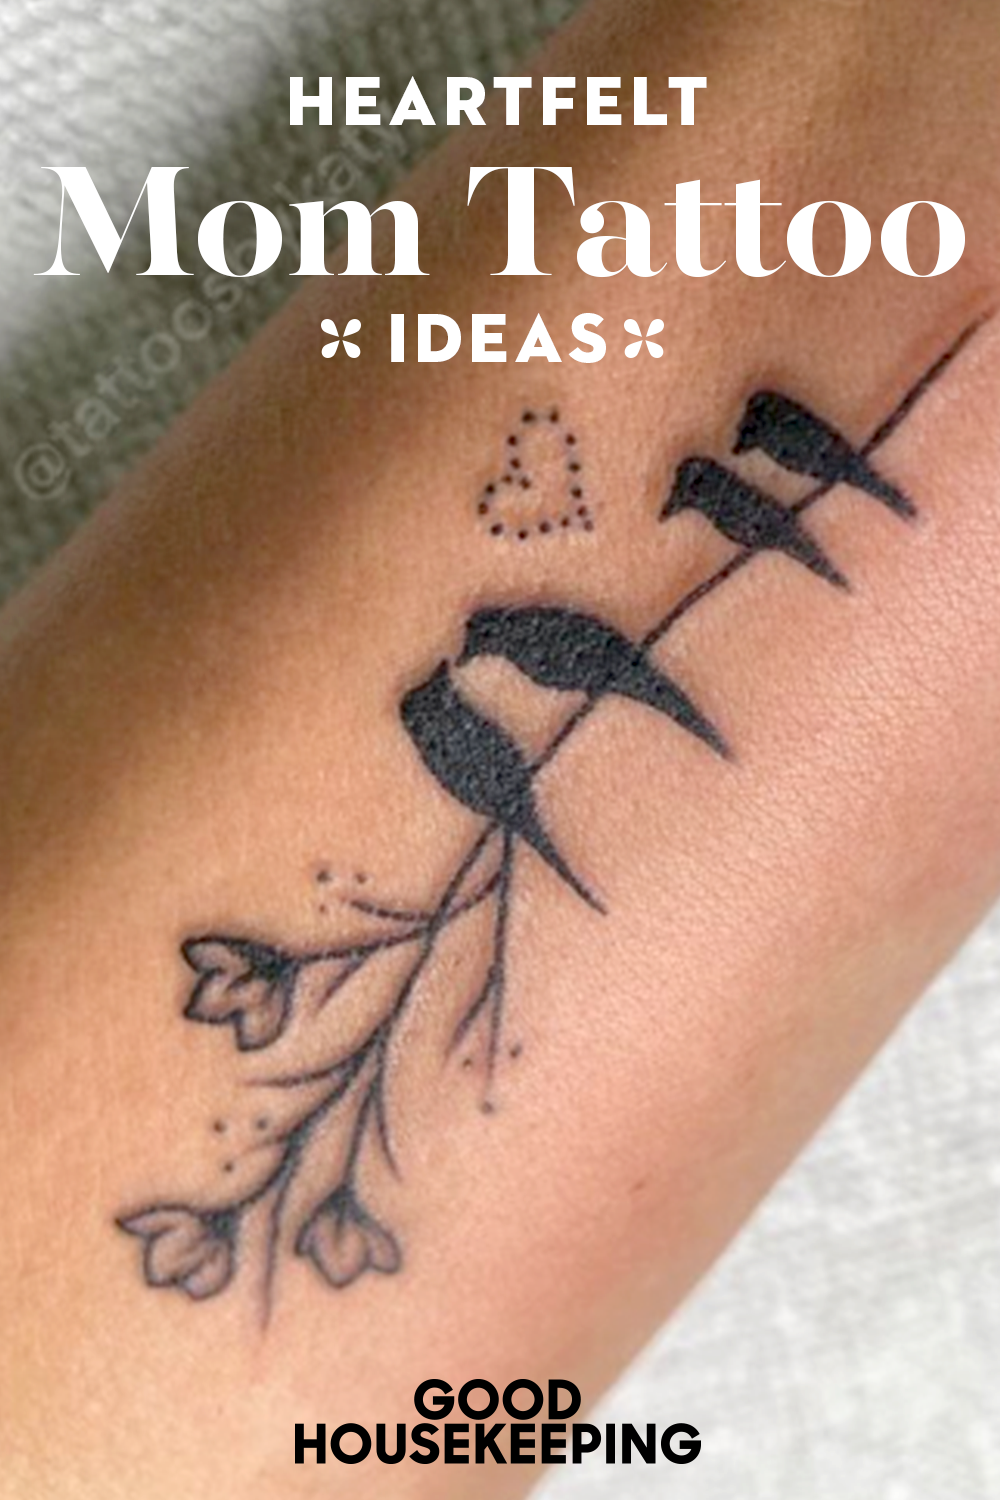 25 Perfect Tattoos for Moms That Will Make You Want One  StayGlam